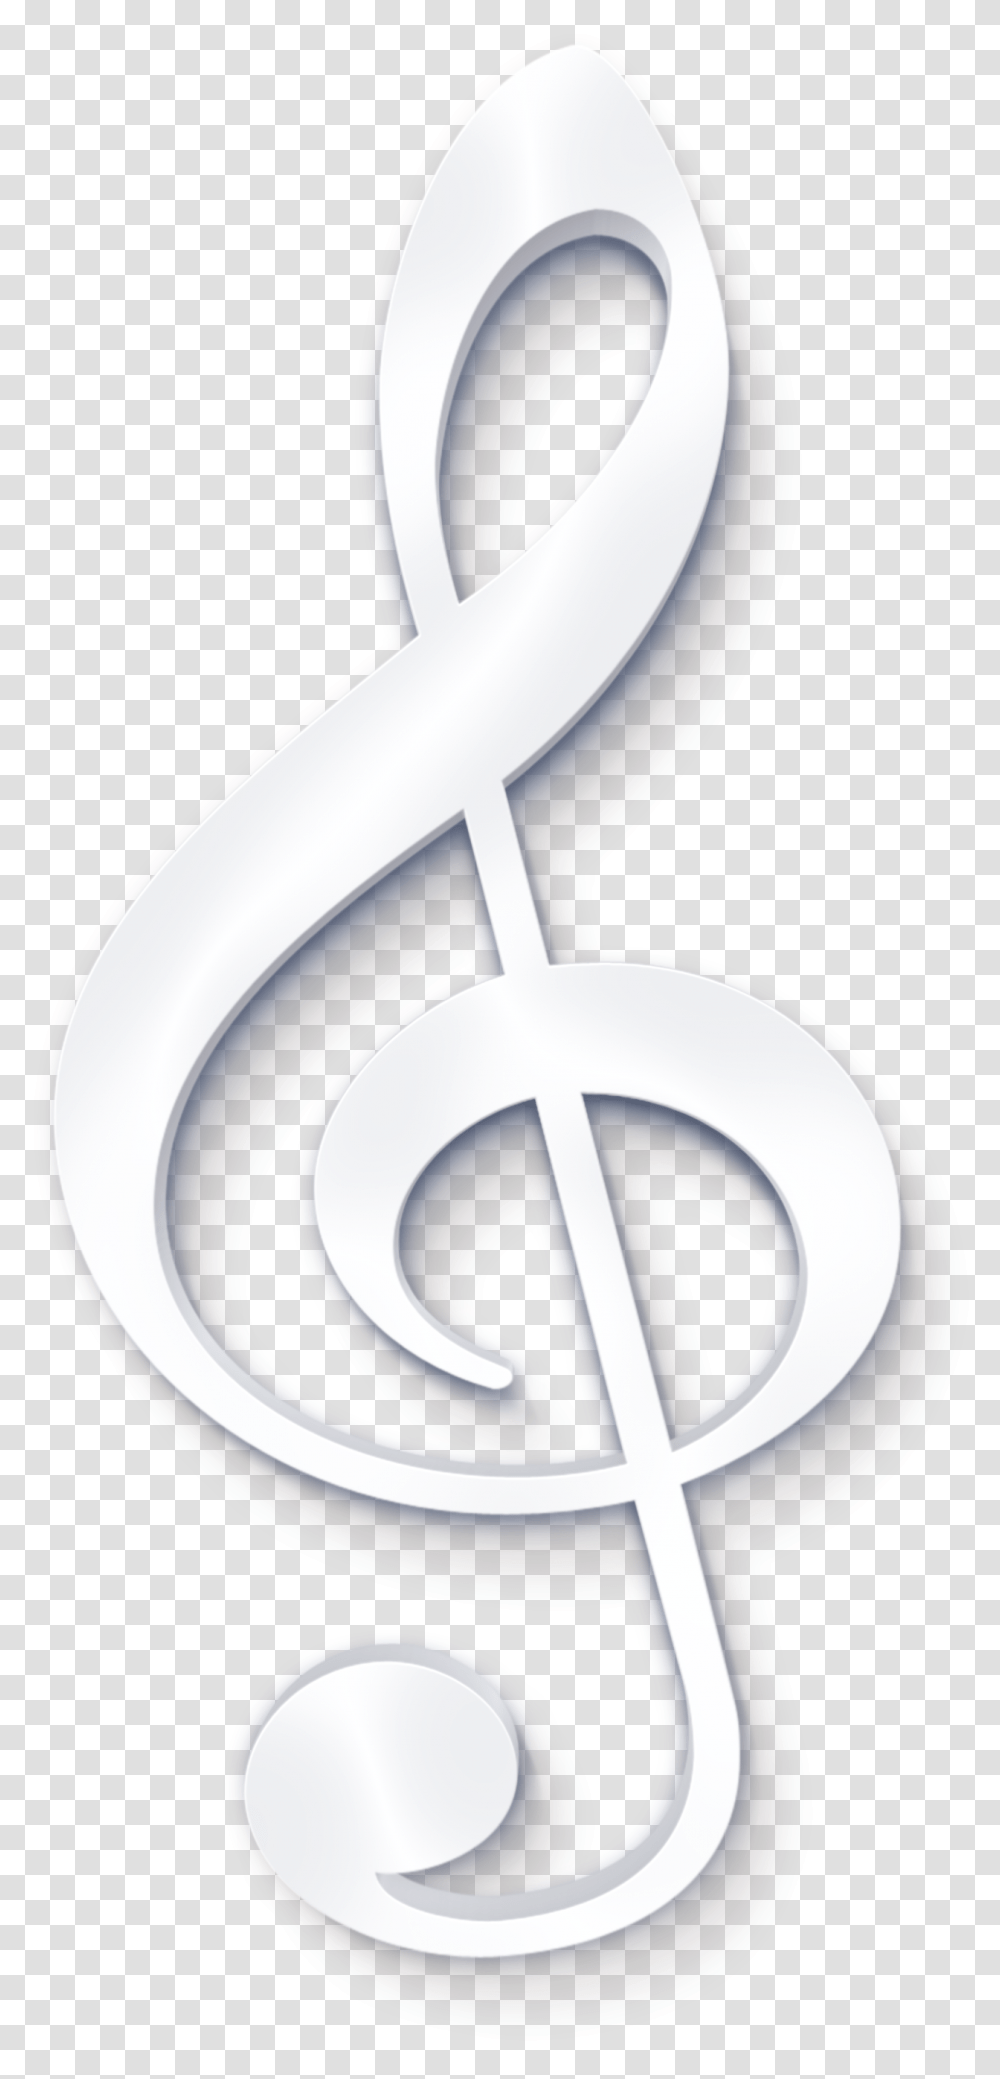 Treble Clef Music Free Image On Pixabay Music Symbol In White, Alphabet, Text, Number, Staircase Transparent Png